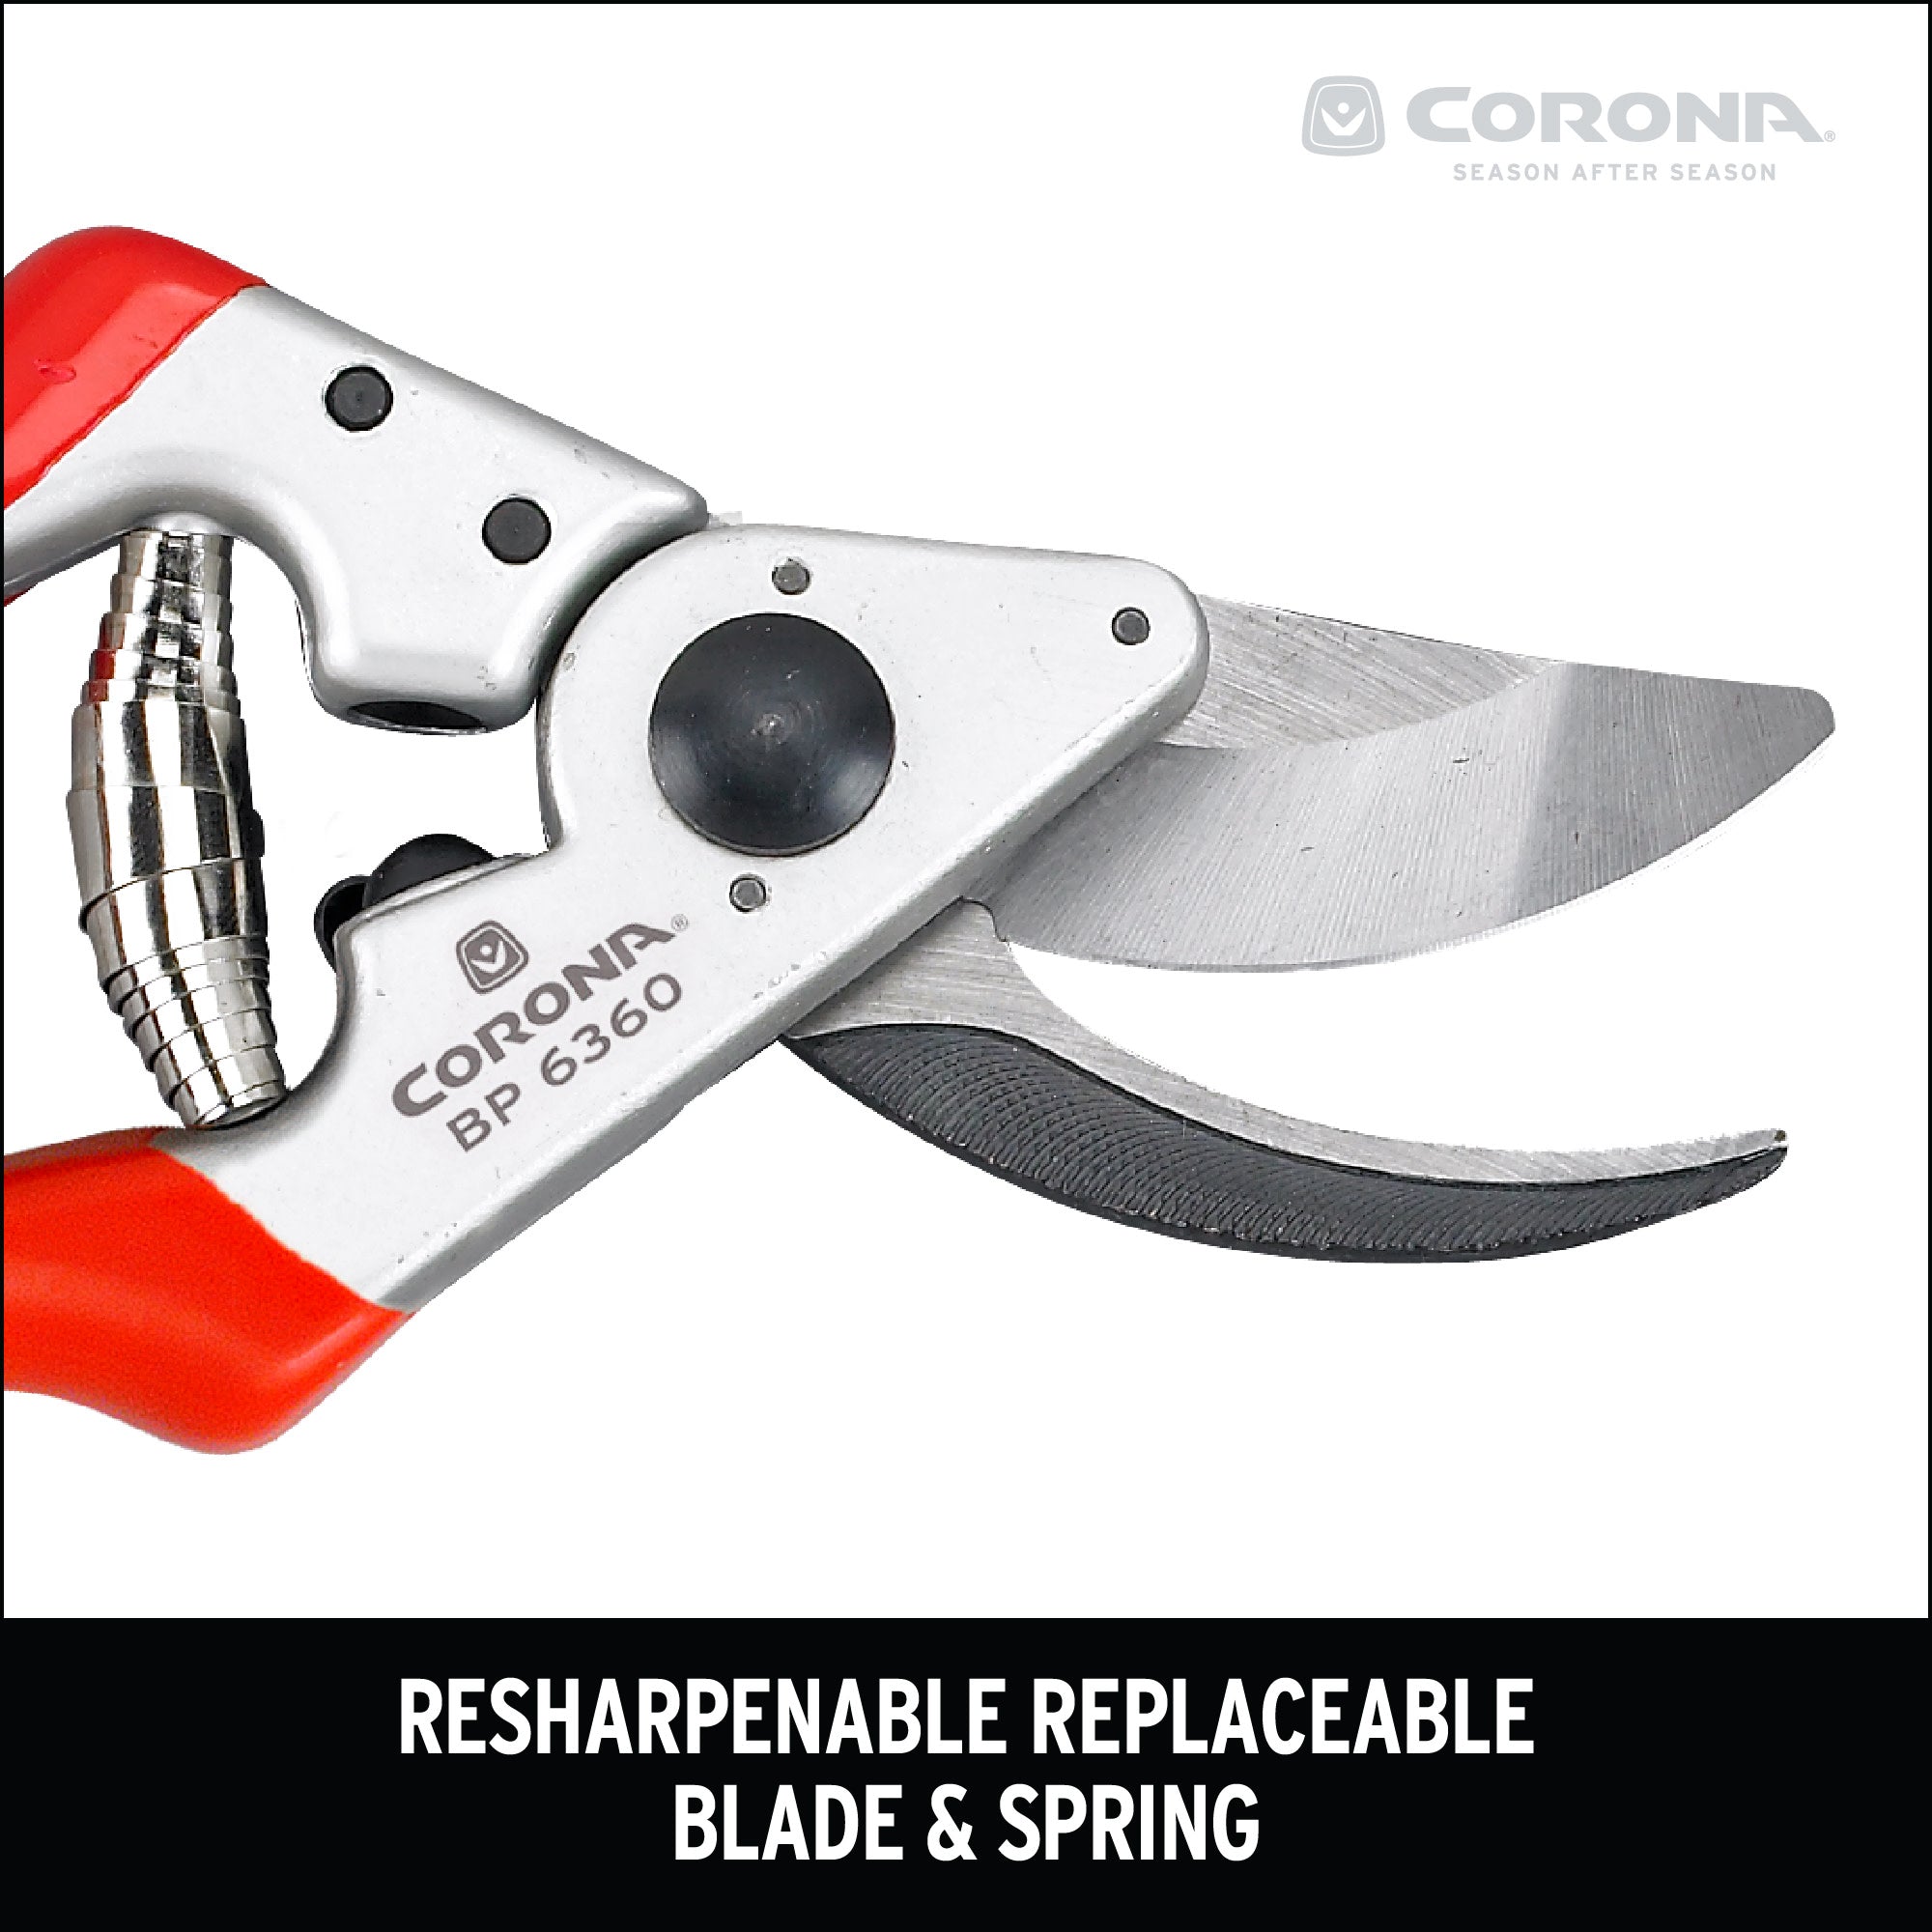 Aluminum Angled Bypass Pruner, 1 in. Cut Capacity